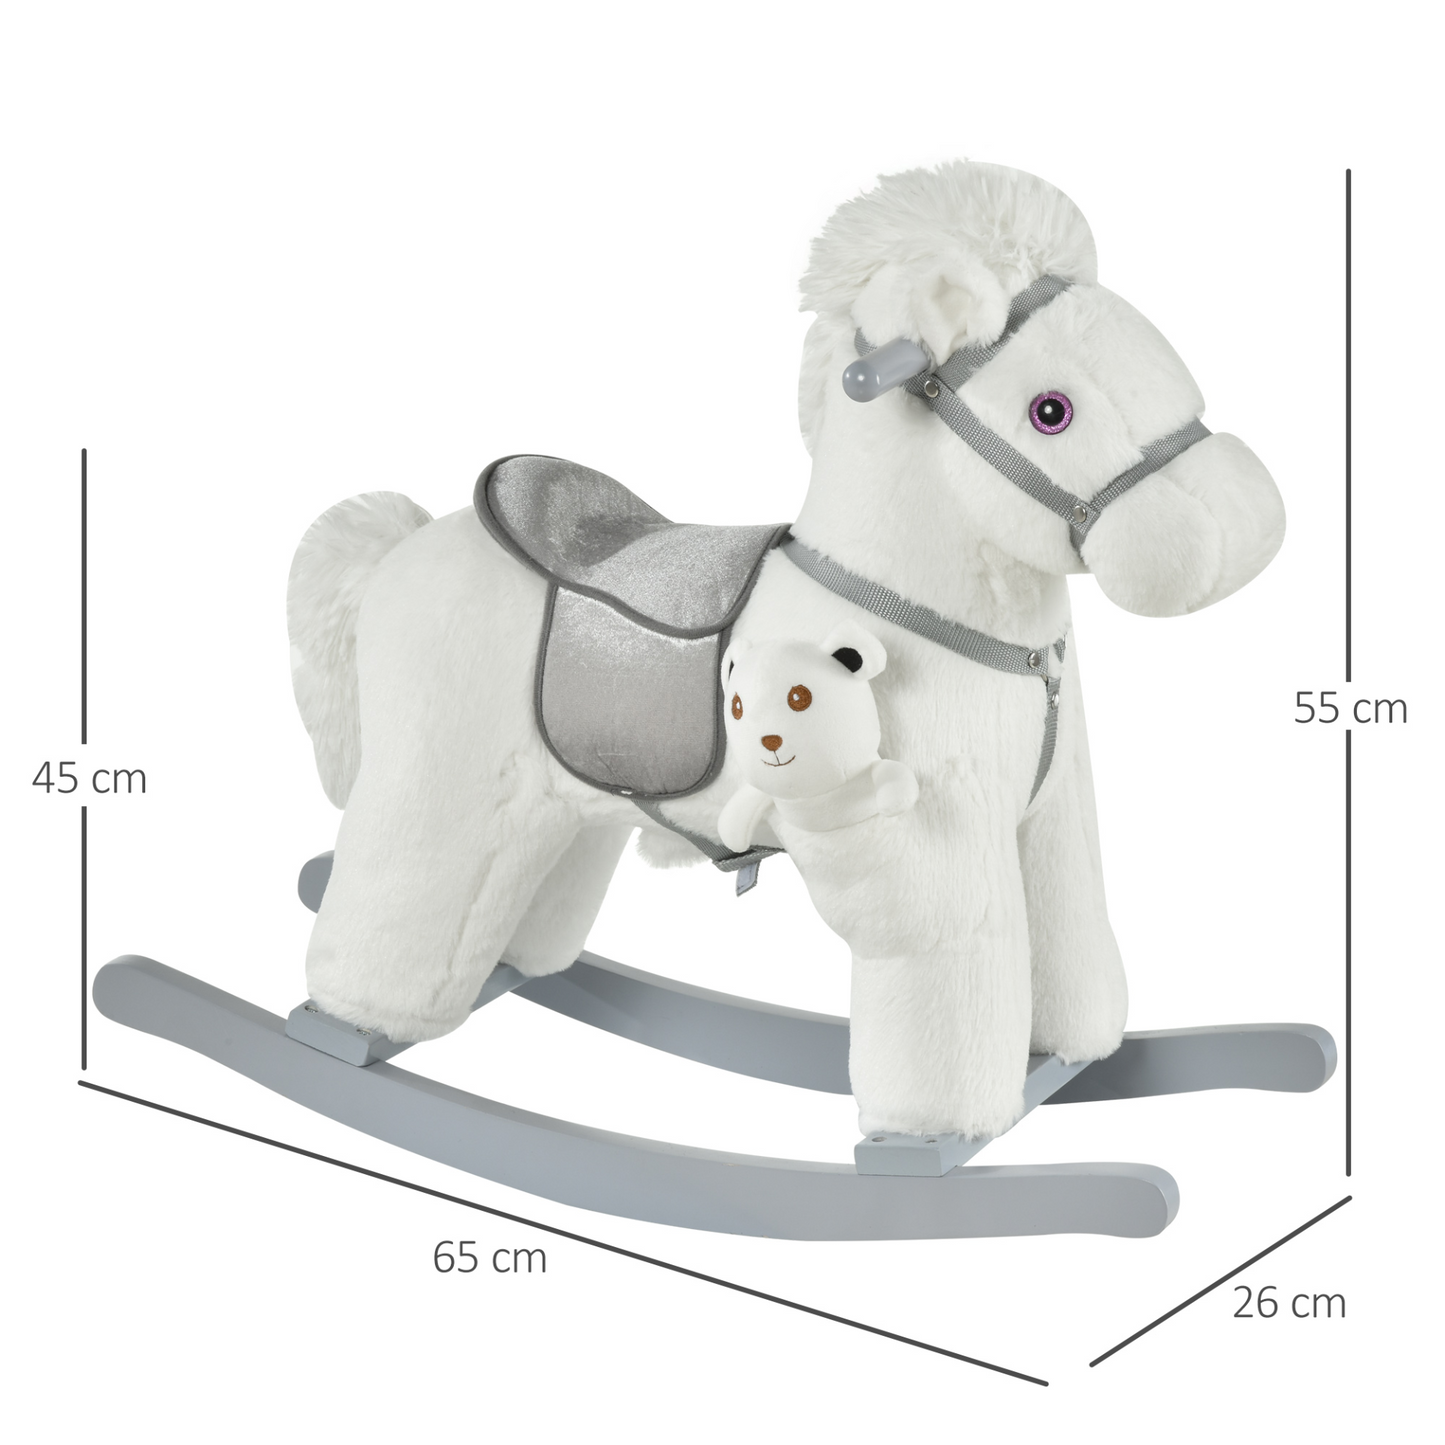 HOMCOM Kids Plush Ride-On Rocking Horse Toy Rocker with Plush Toy Realistic Sounds for Child 18-36 Months White